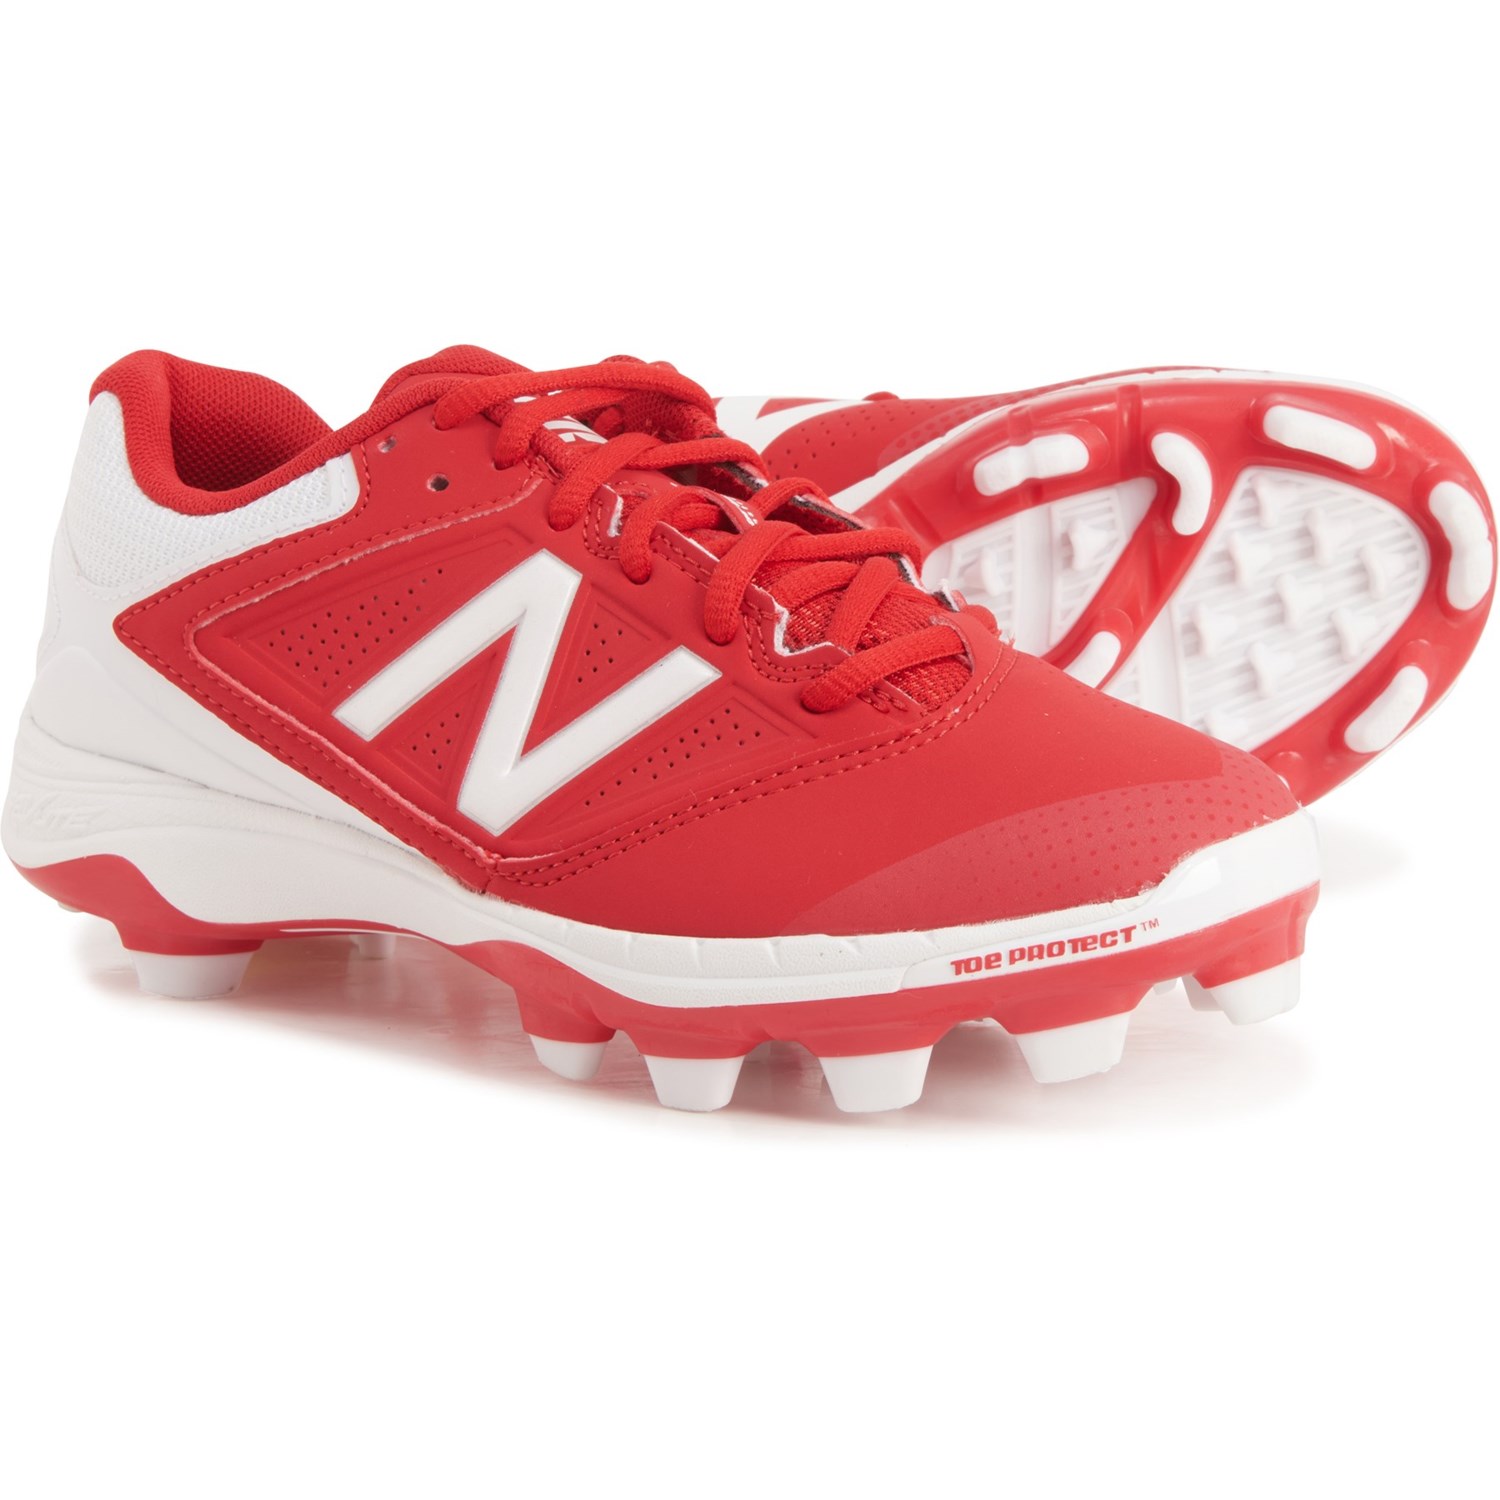 New Balance 4040 Softball Cleats - Molded Cleats (For Women)